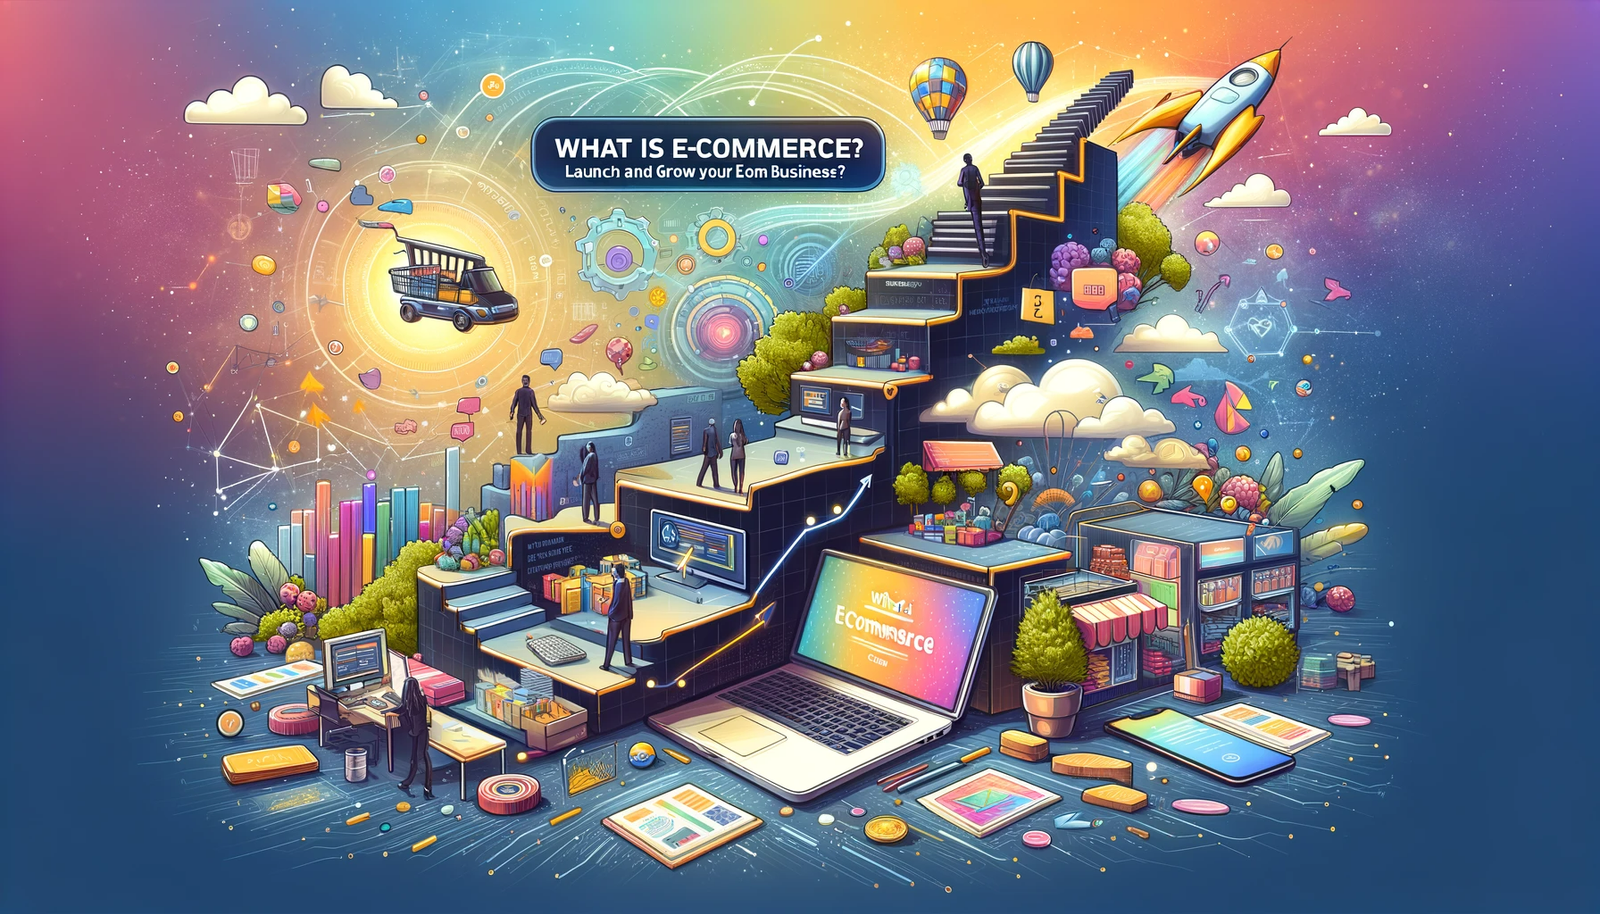 What is eCommerce? Launch and Grow Your eCom Business 